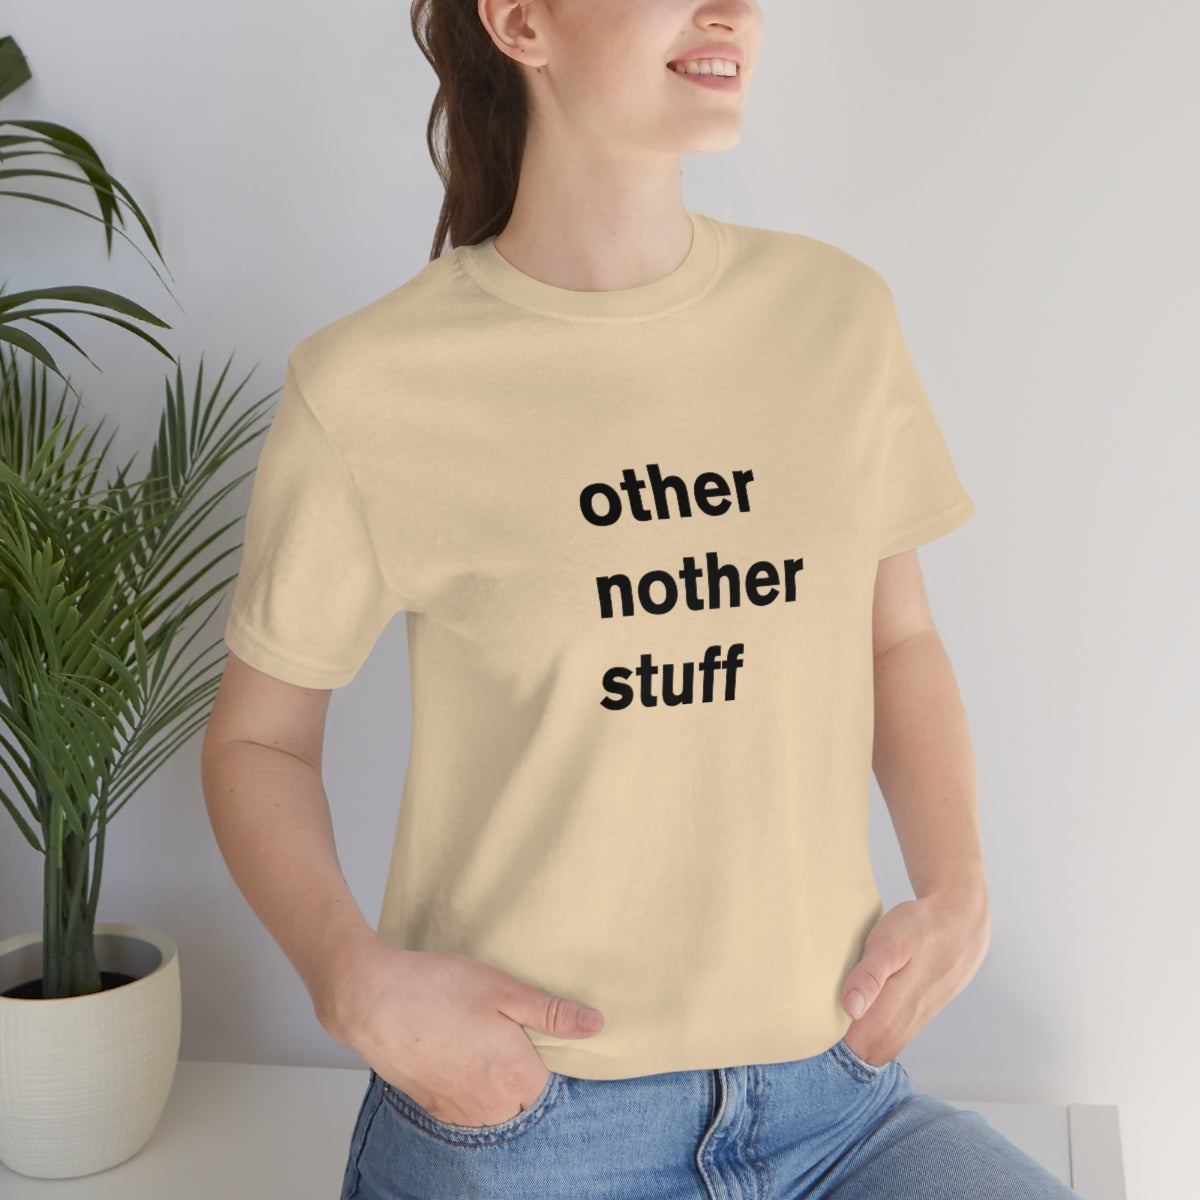 other nother stuff - t-shirt